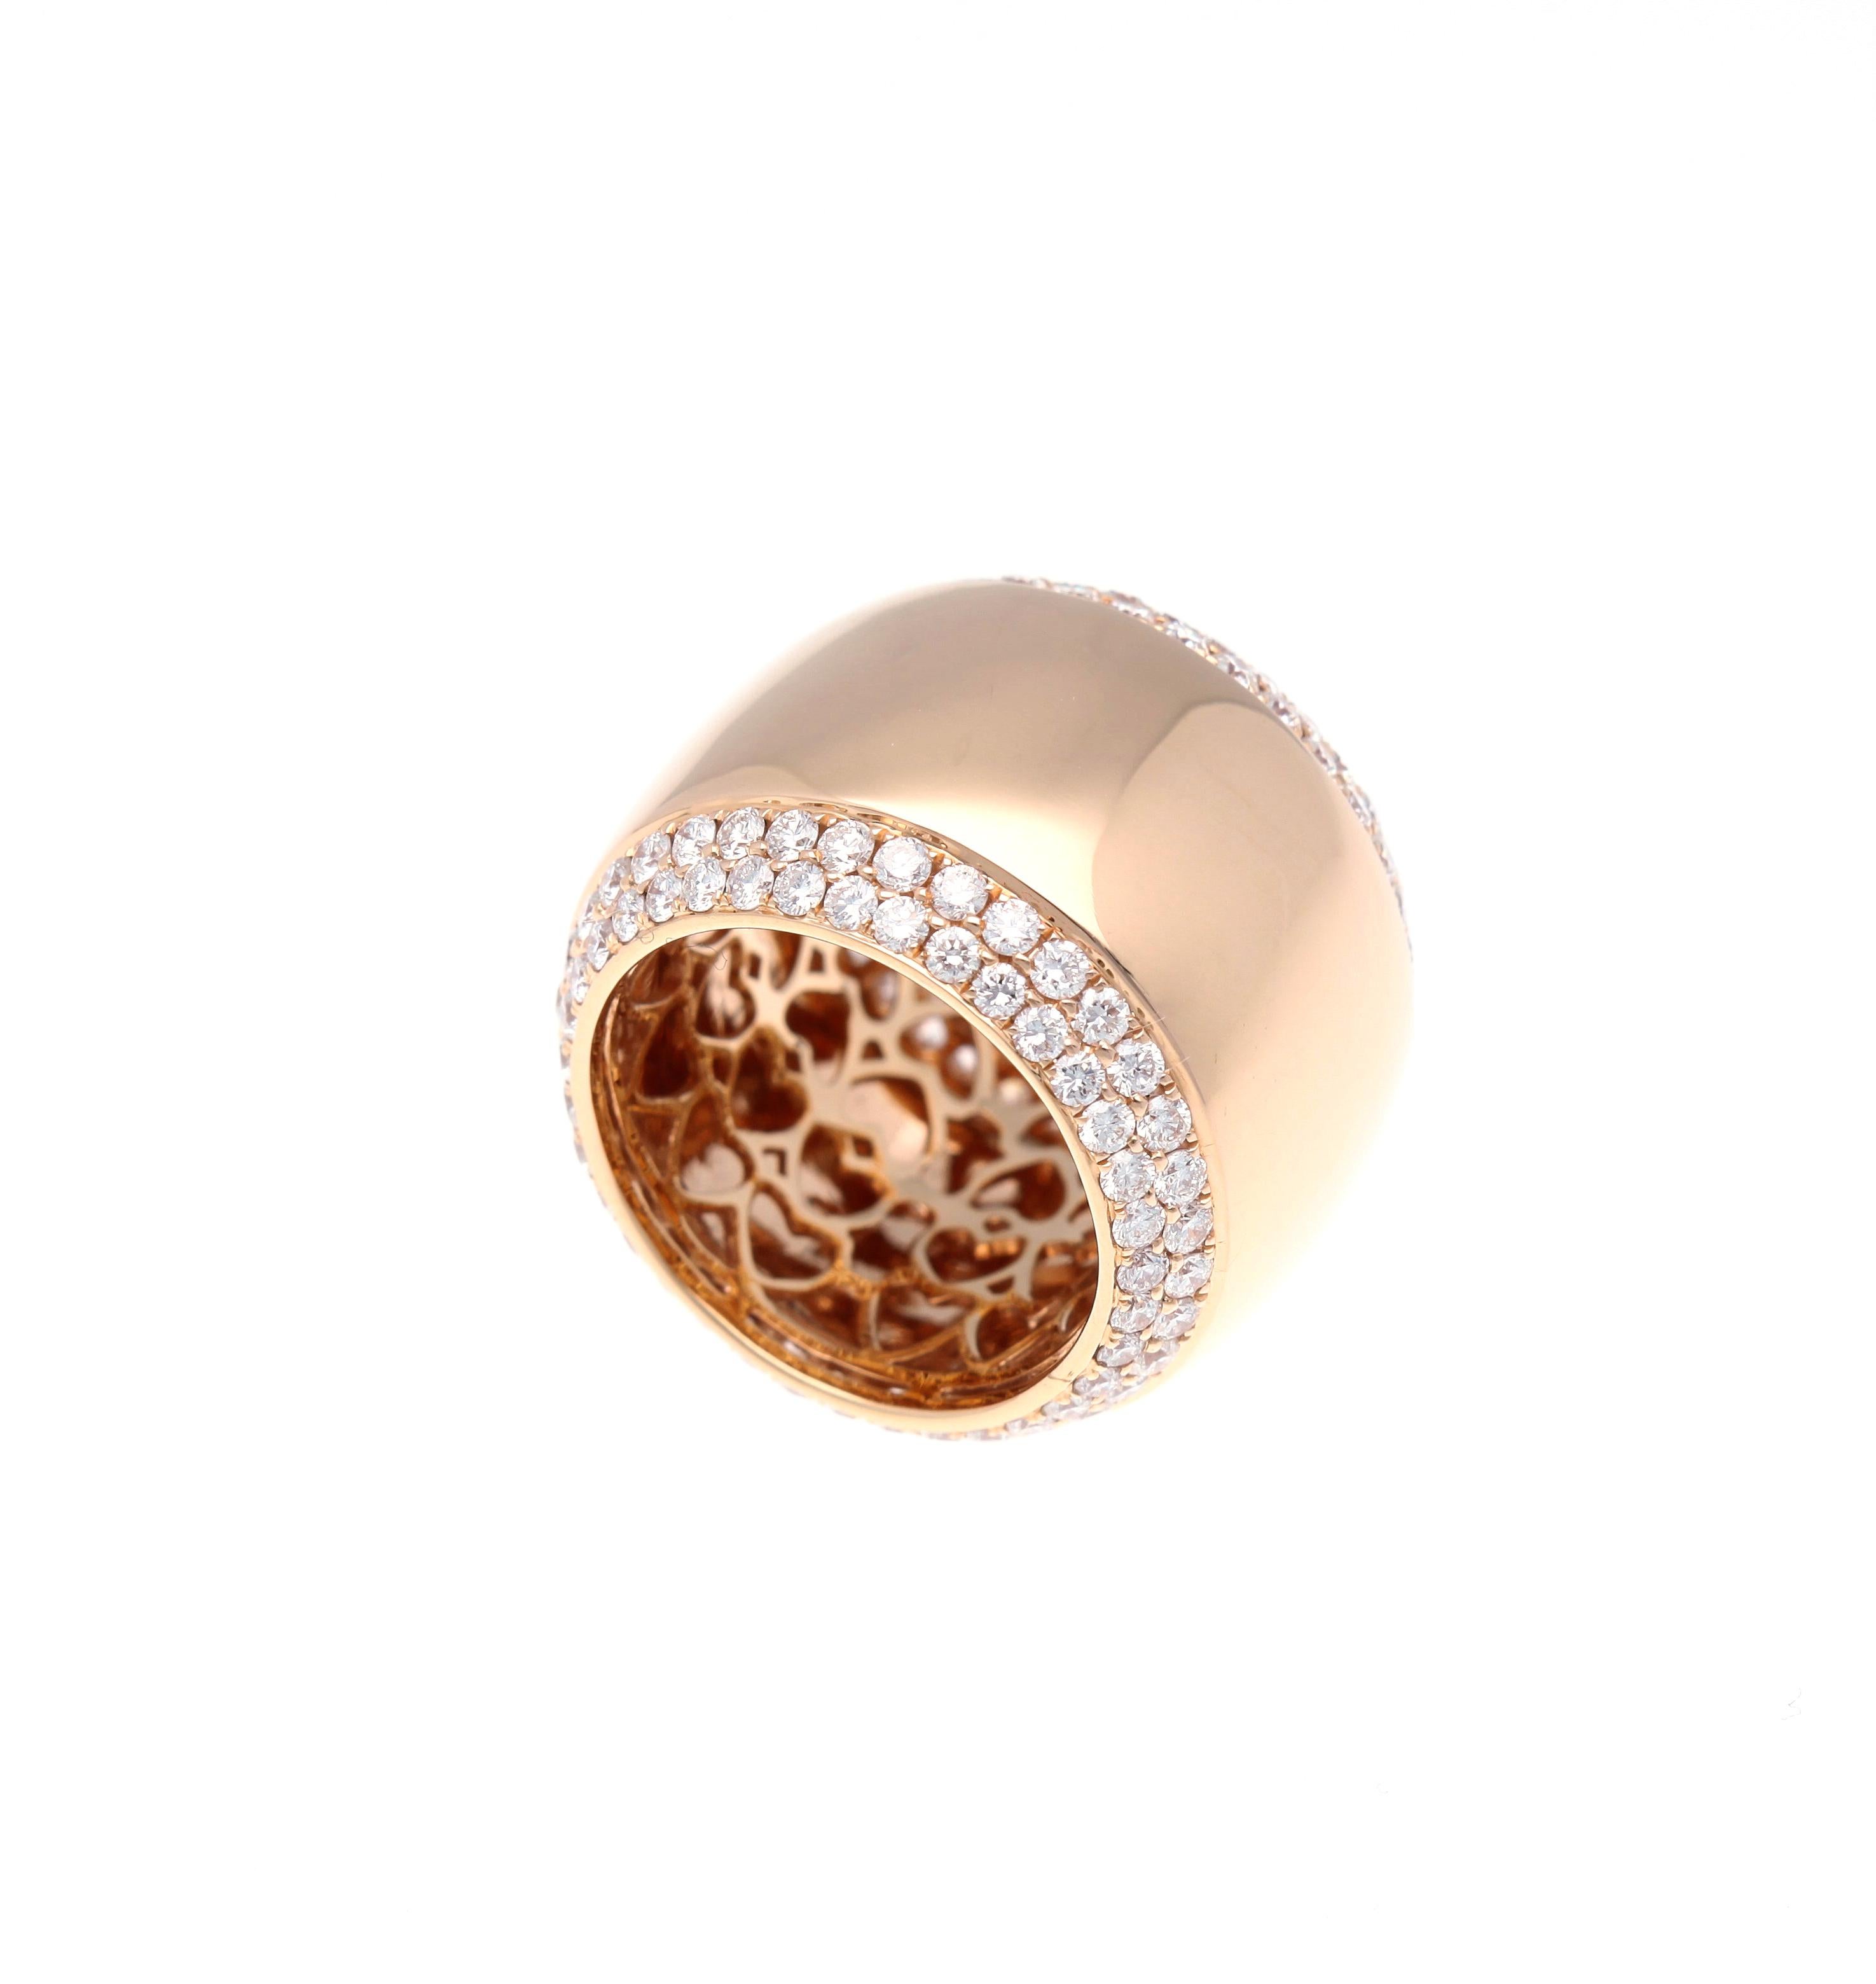 Brilliant Cut 18 Karat Rose Gold Band Ring with Diamonds Total Weight 3.39 Carat For Sale